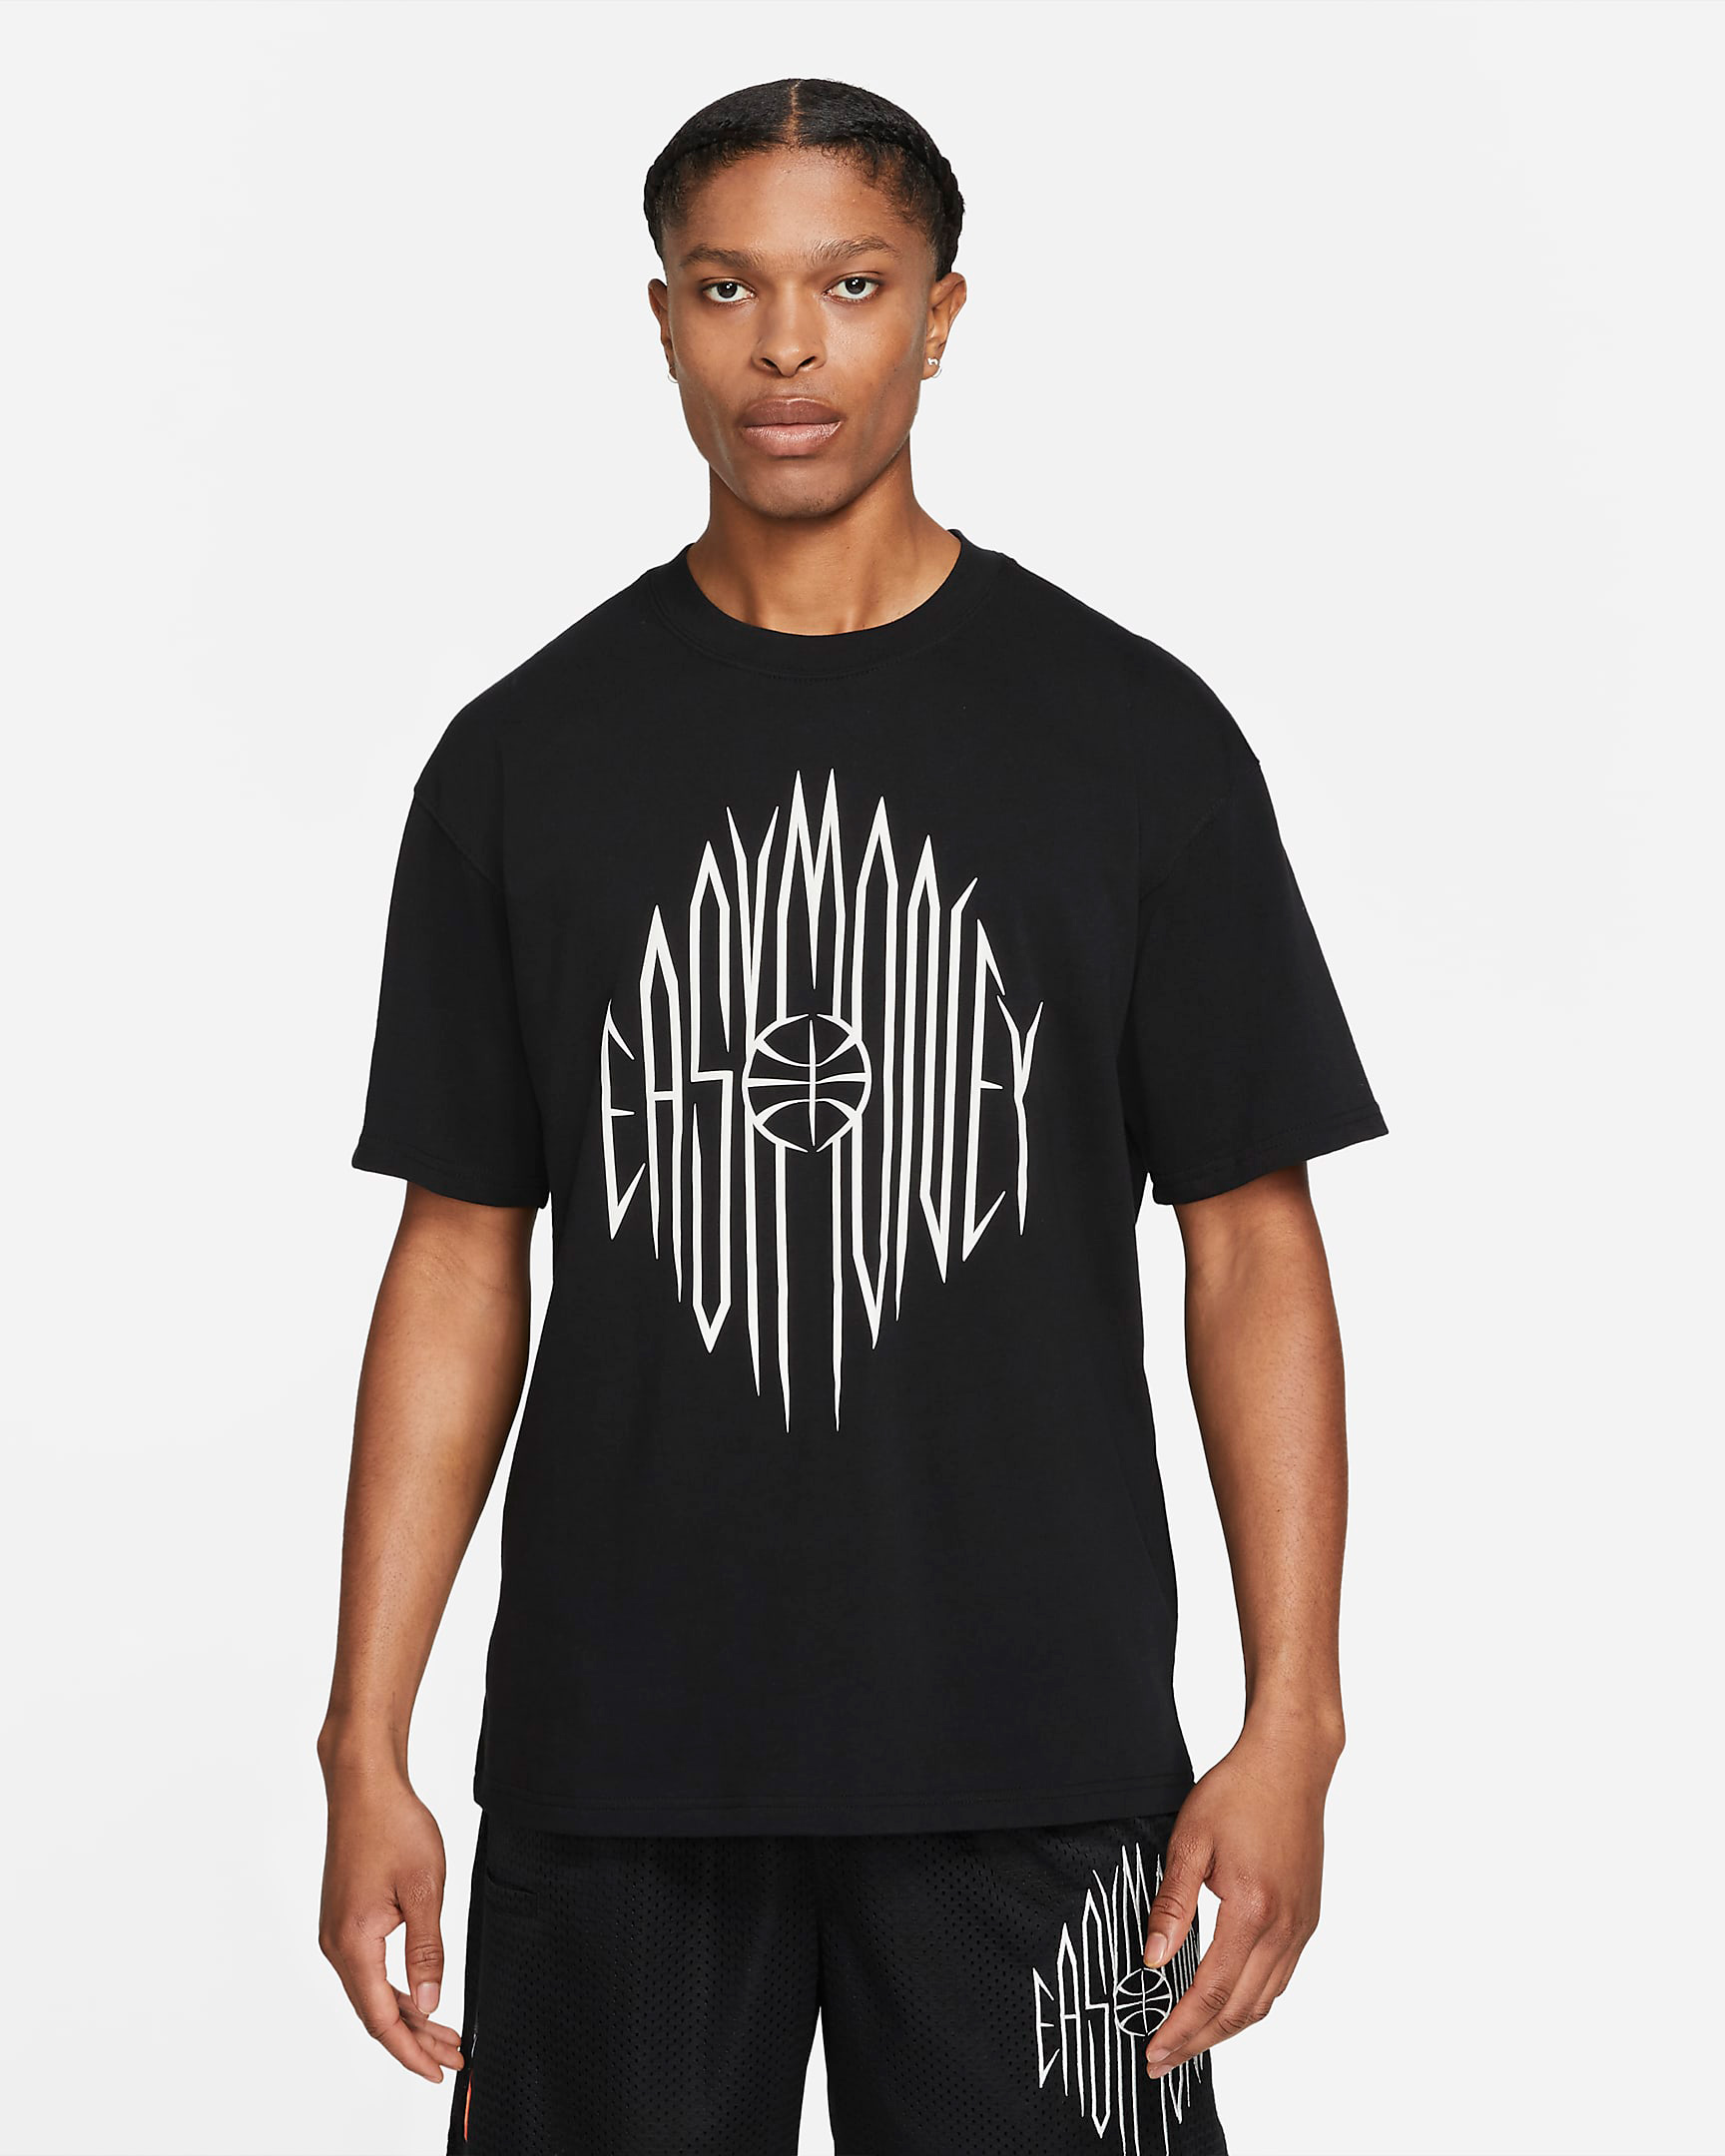 Nike KD 14 Black White Shirts Clothing Outfits to Match